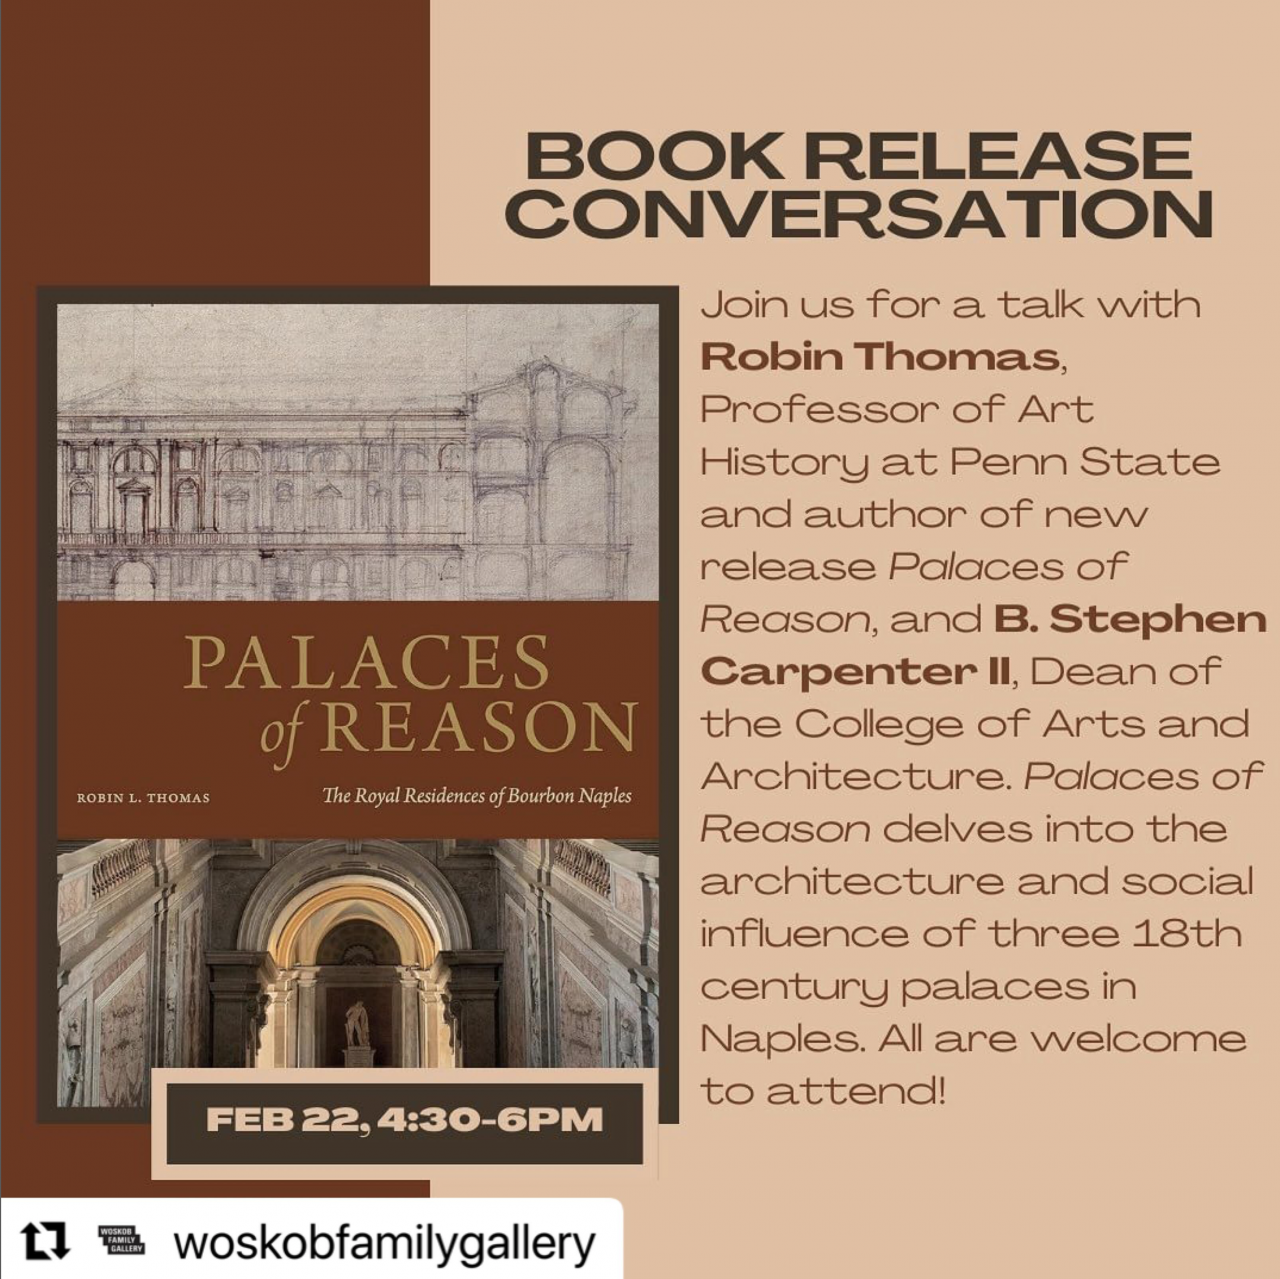 Square flyer for upcoming book release conversation event, to promote Professor Robin Thomas' new release.